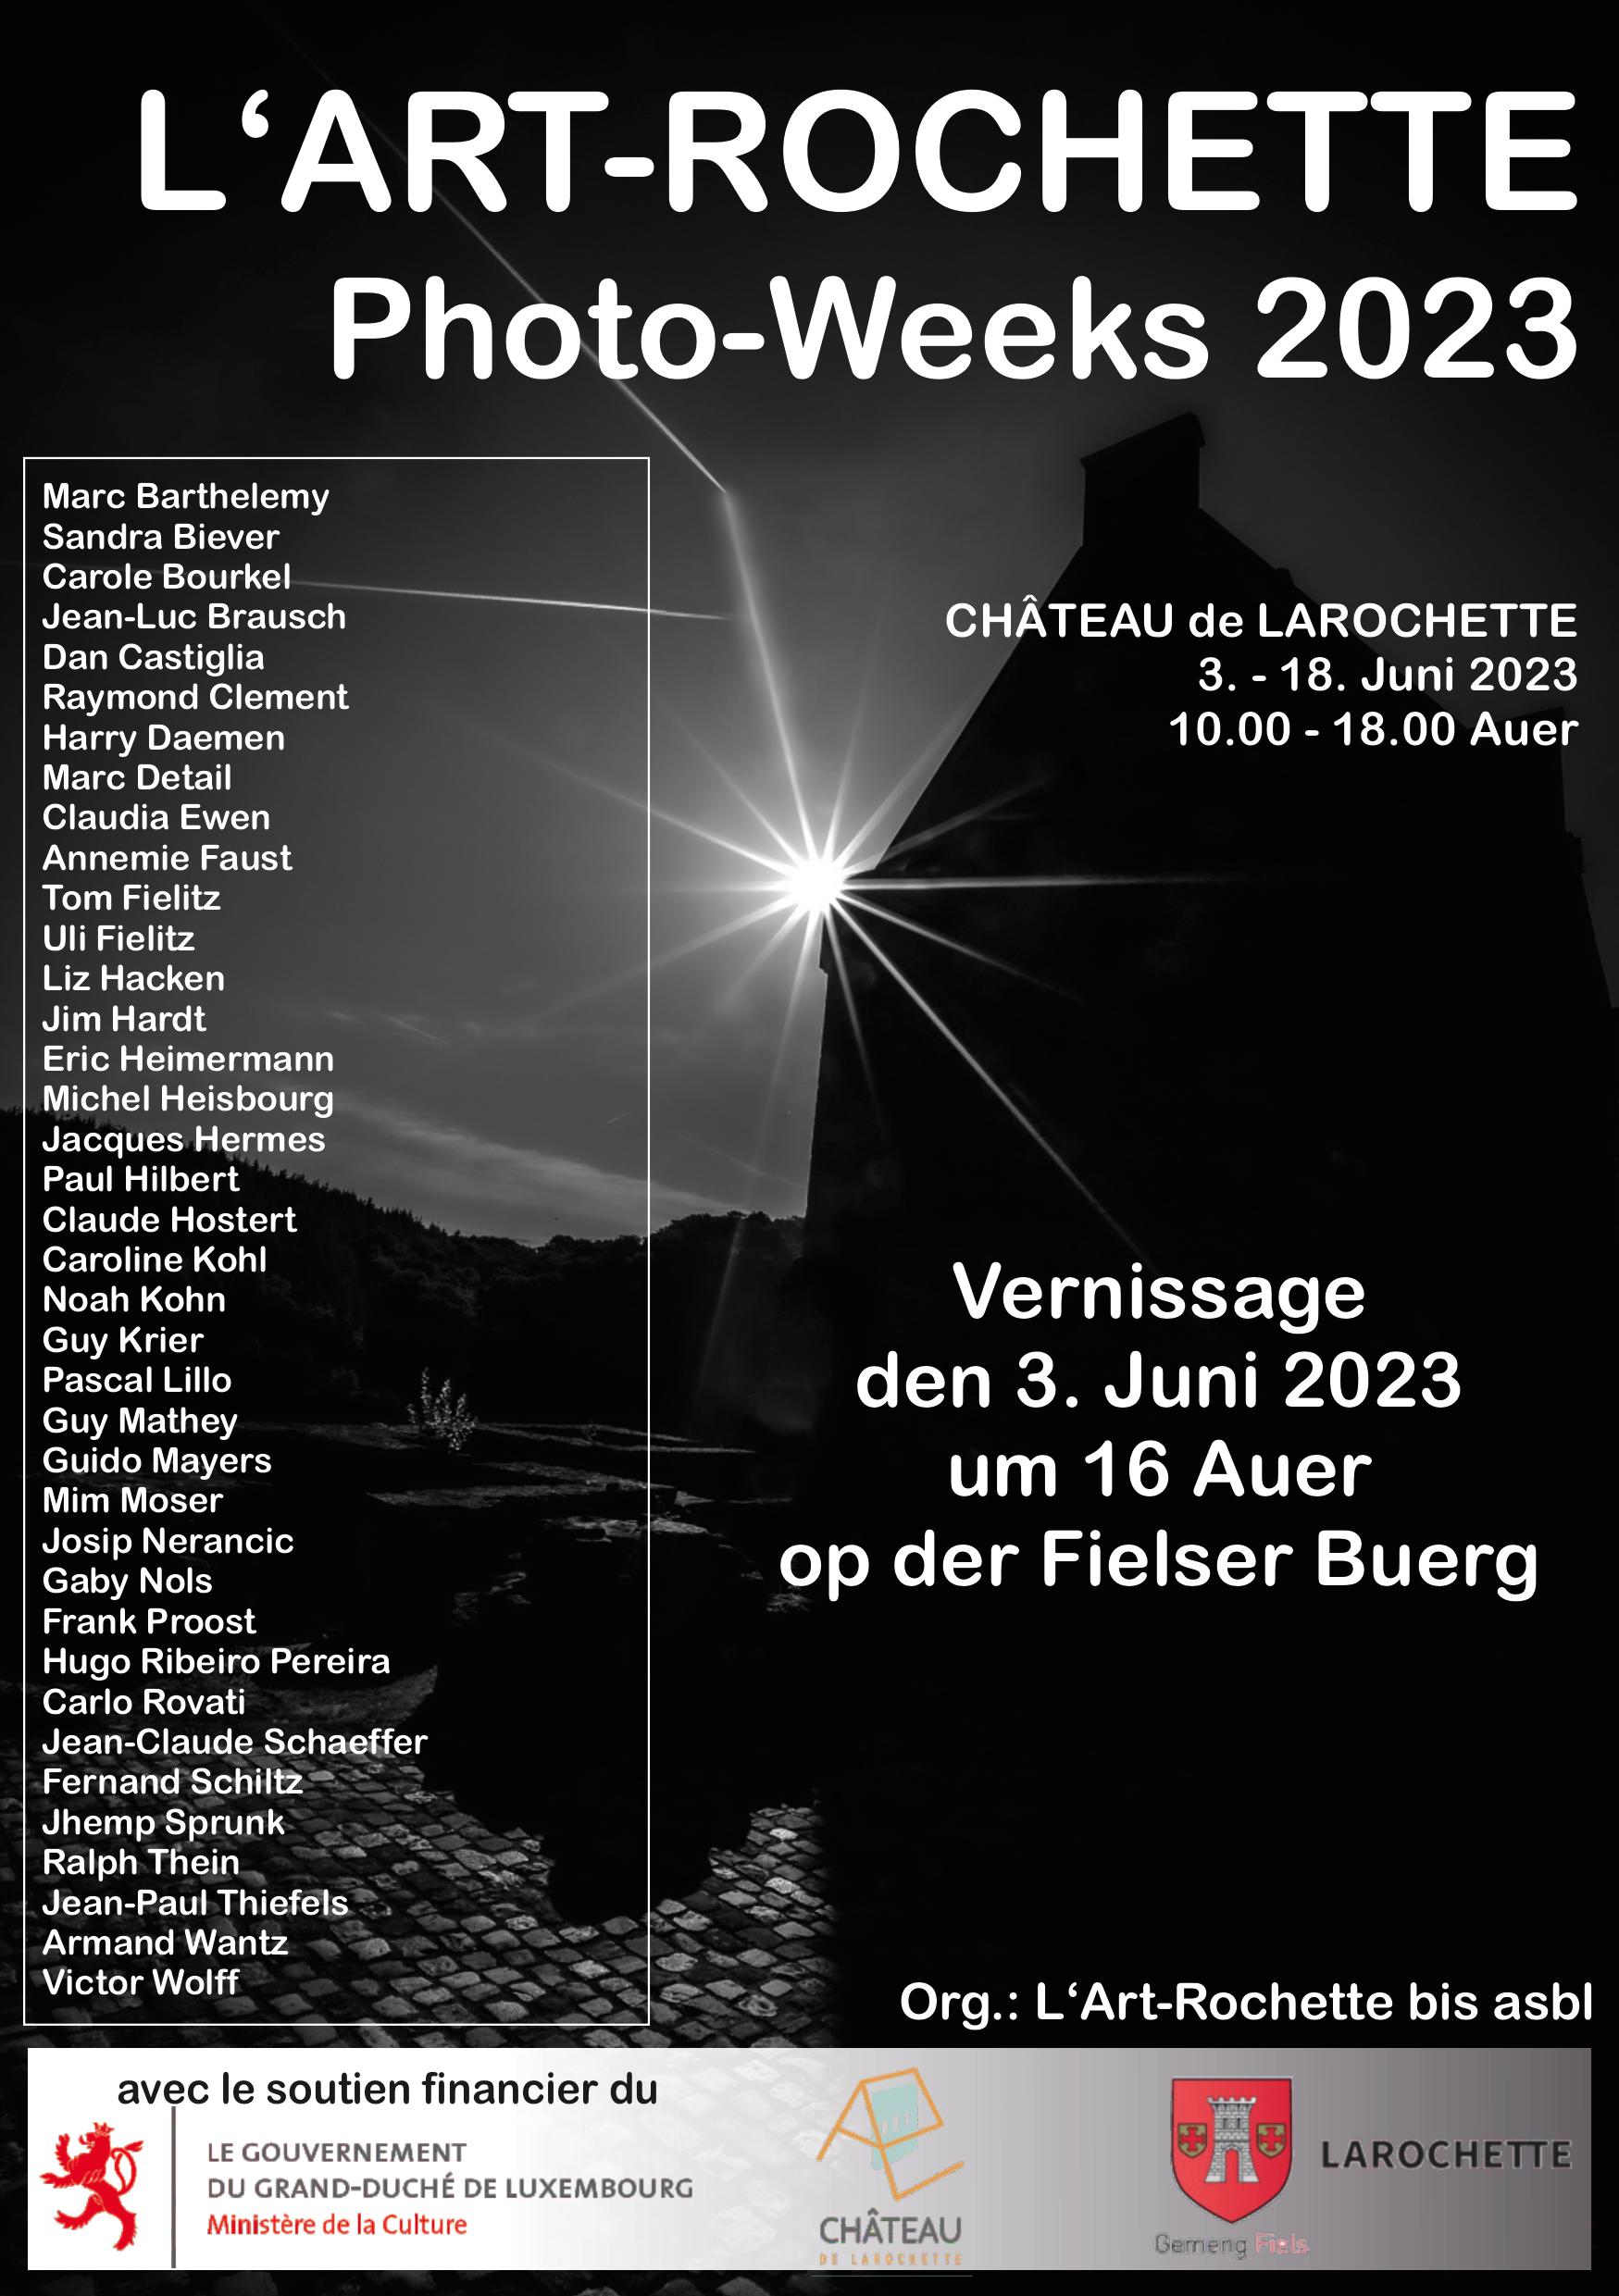 3rd edition of the L'Art-Rochette Photoweeks